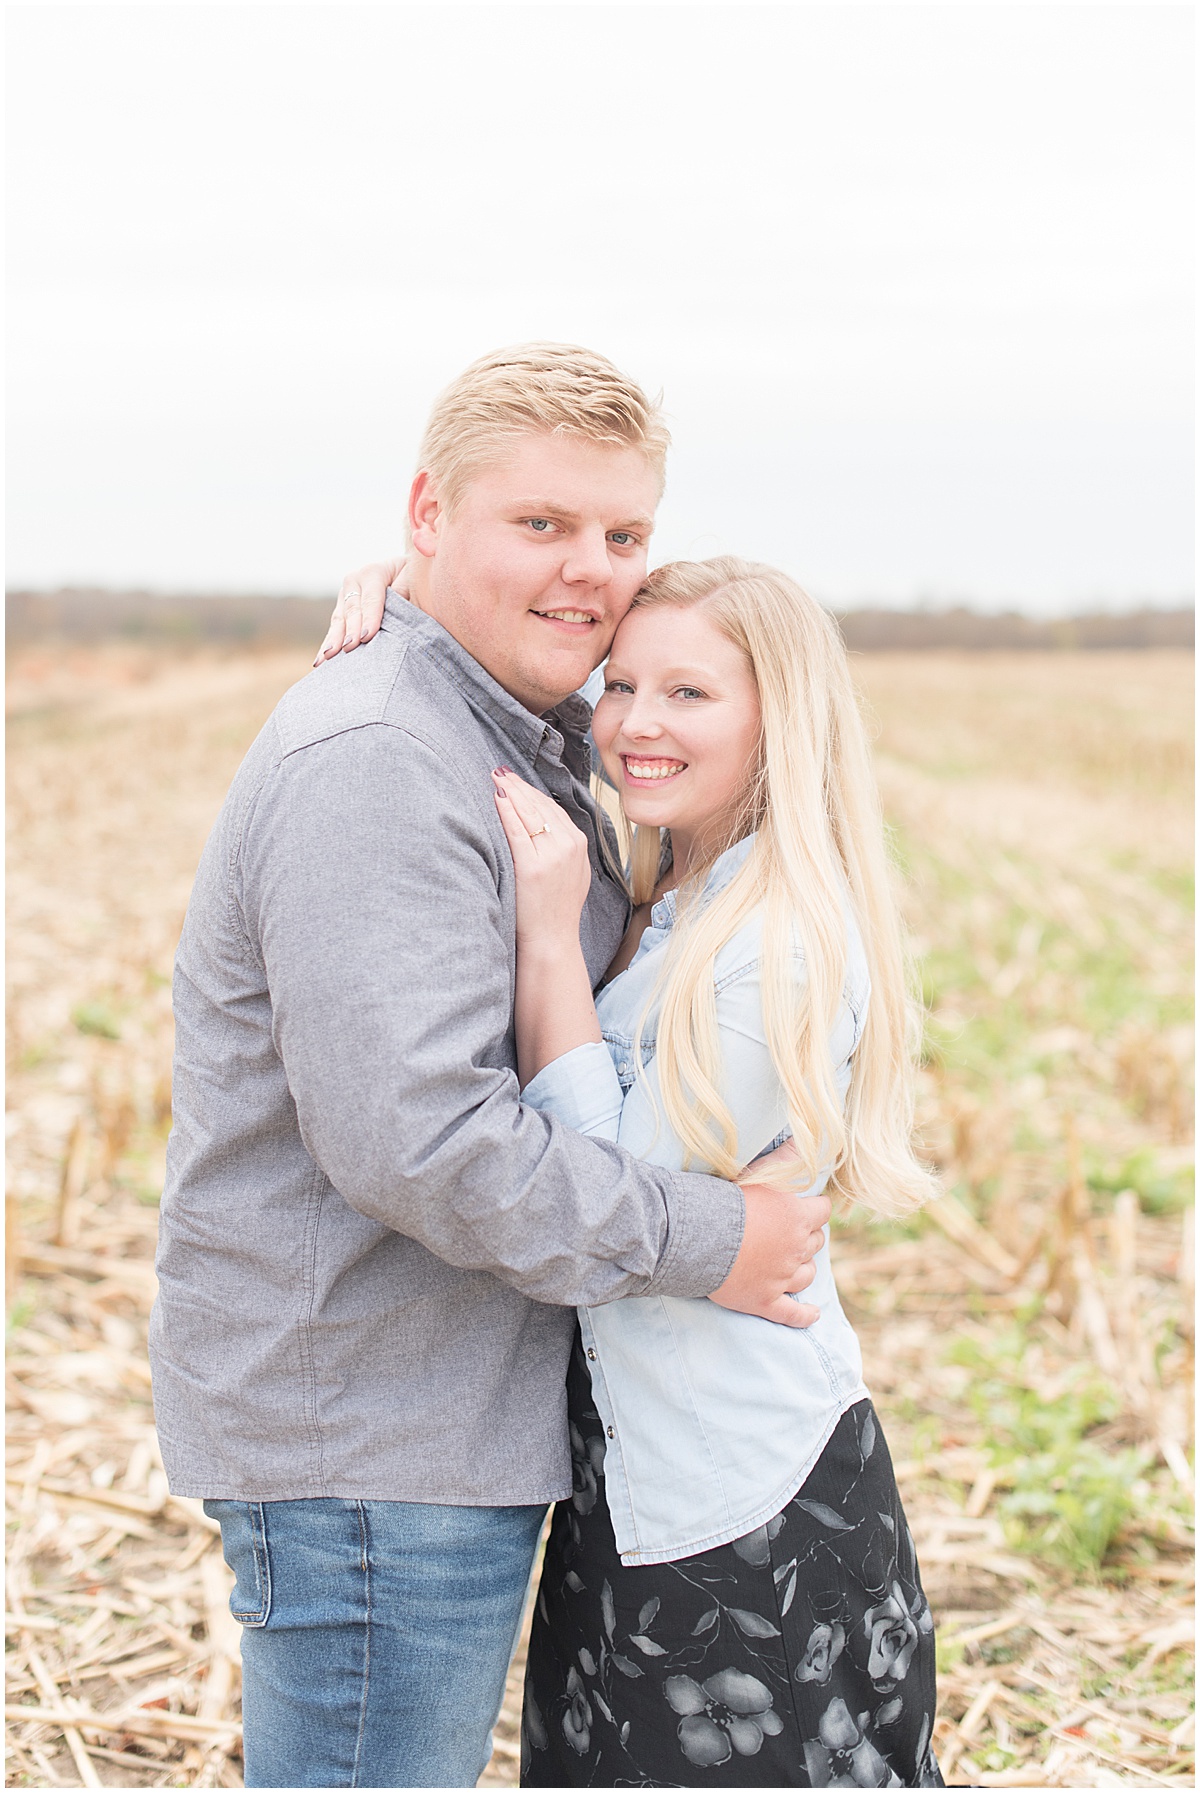 Tyler Van Wanzeele and Baileigh Fleming engagement photos at Wea Creek Orchard in Lafayette Indiana9.jpg